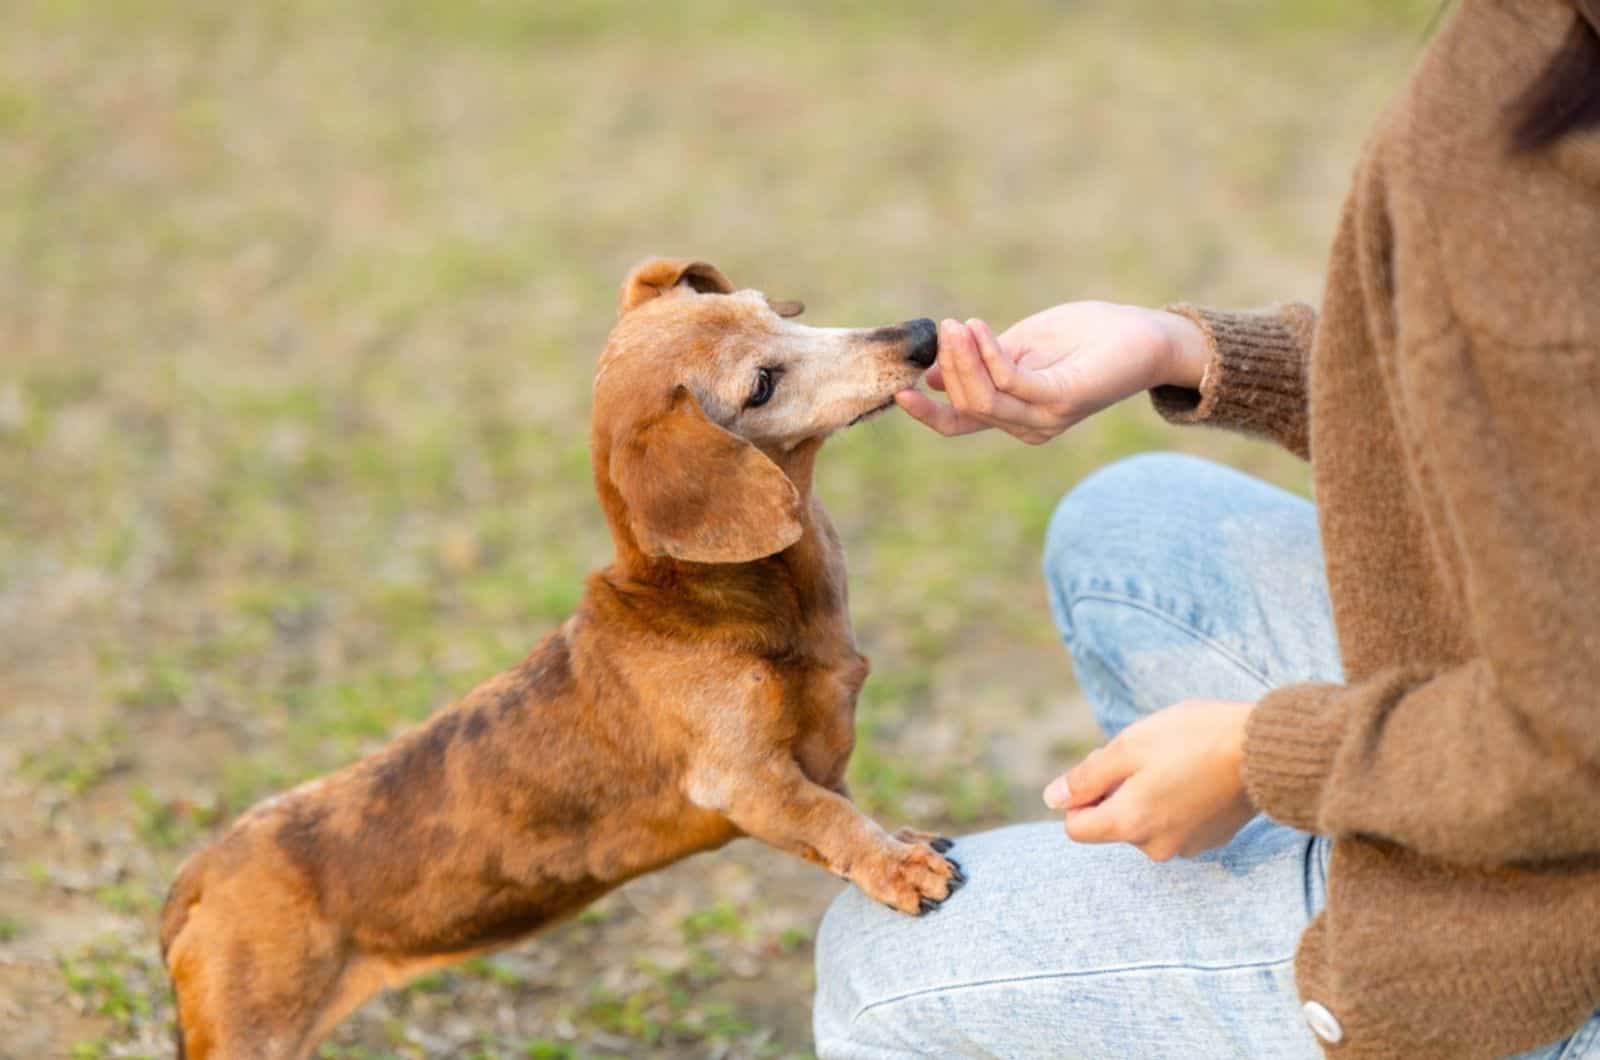 pet owner gives her dachshund dog a treat in the park